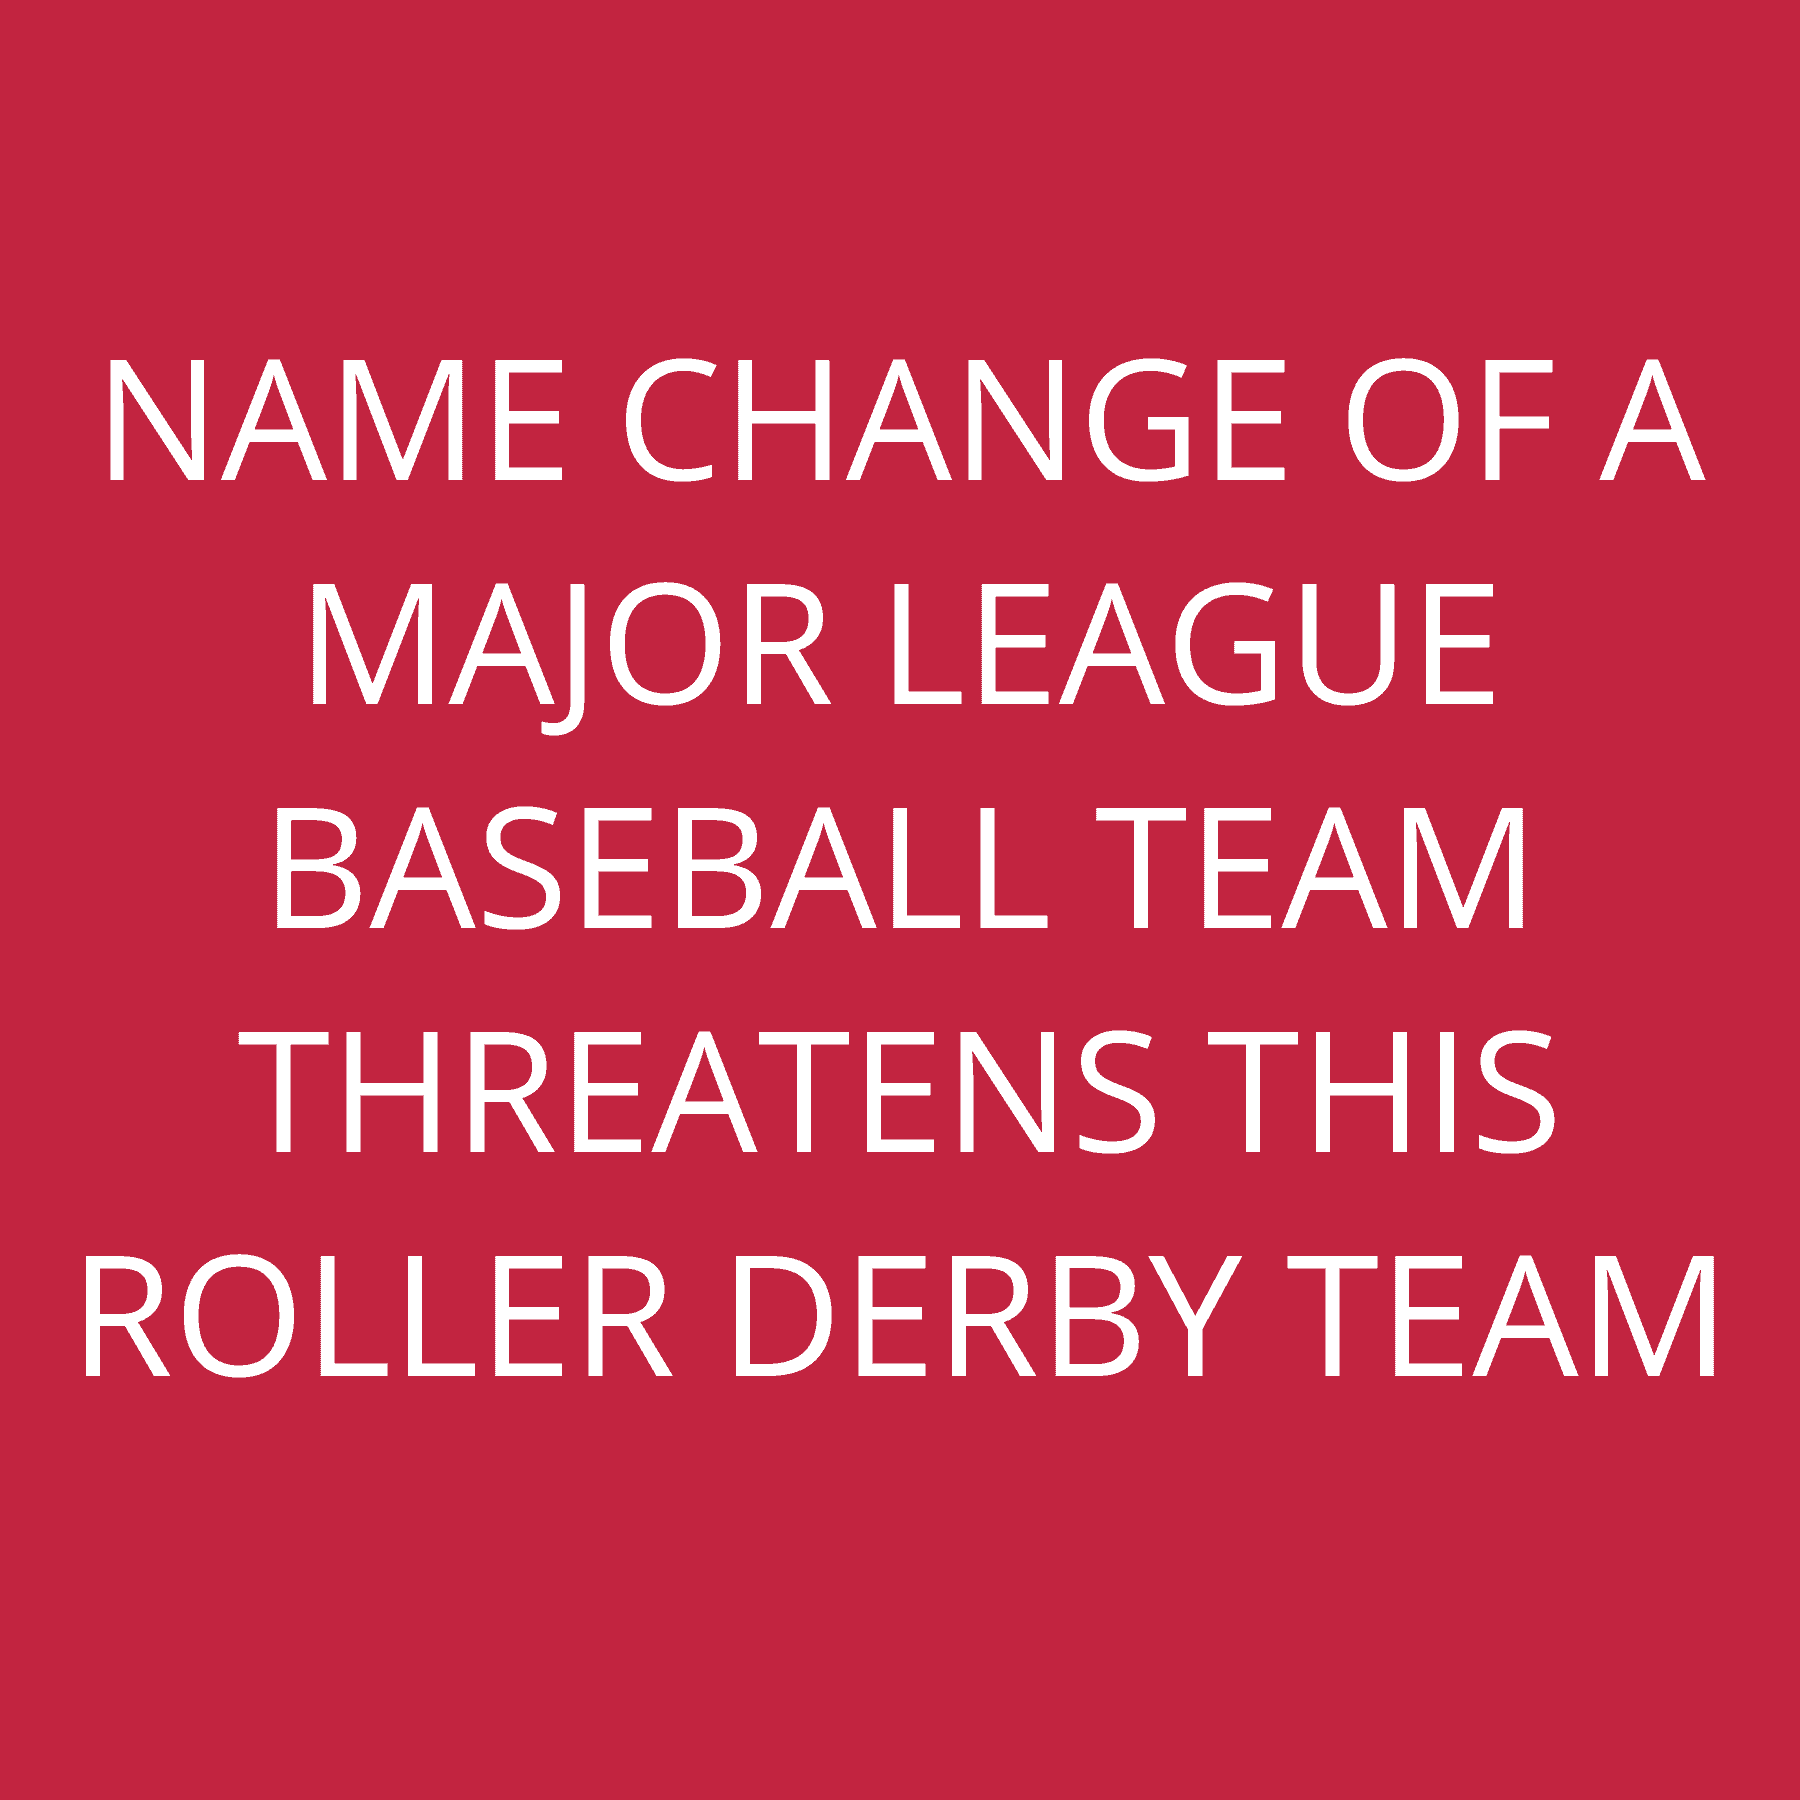 Name change of a Major League Baseball team threatens this roller derby team